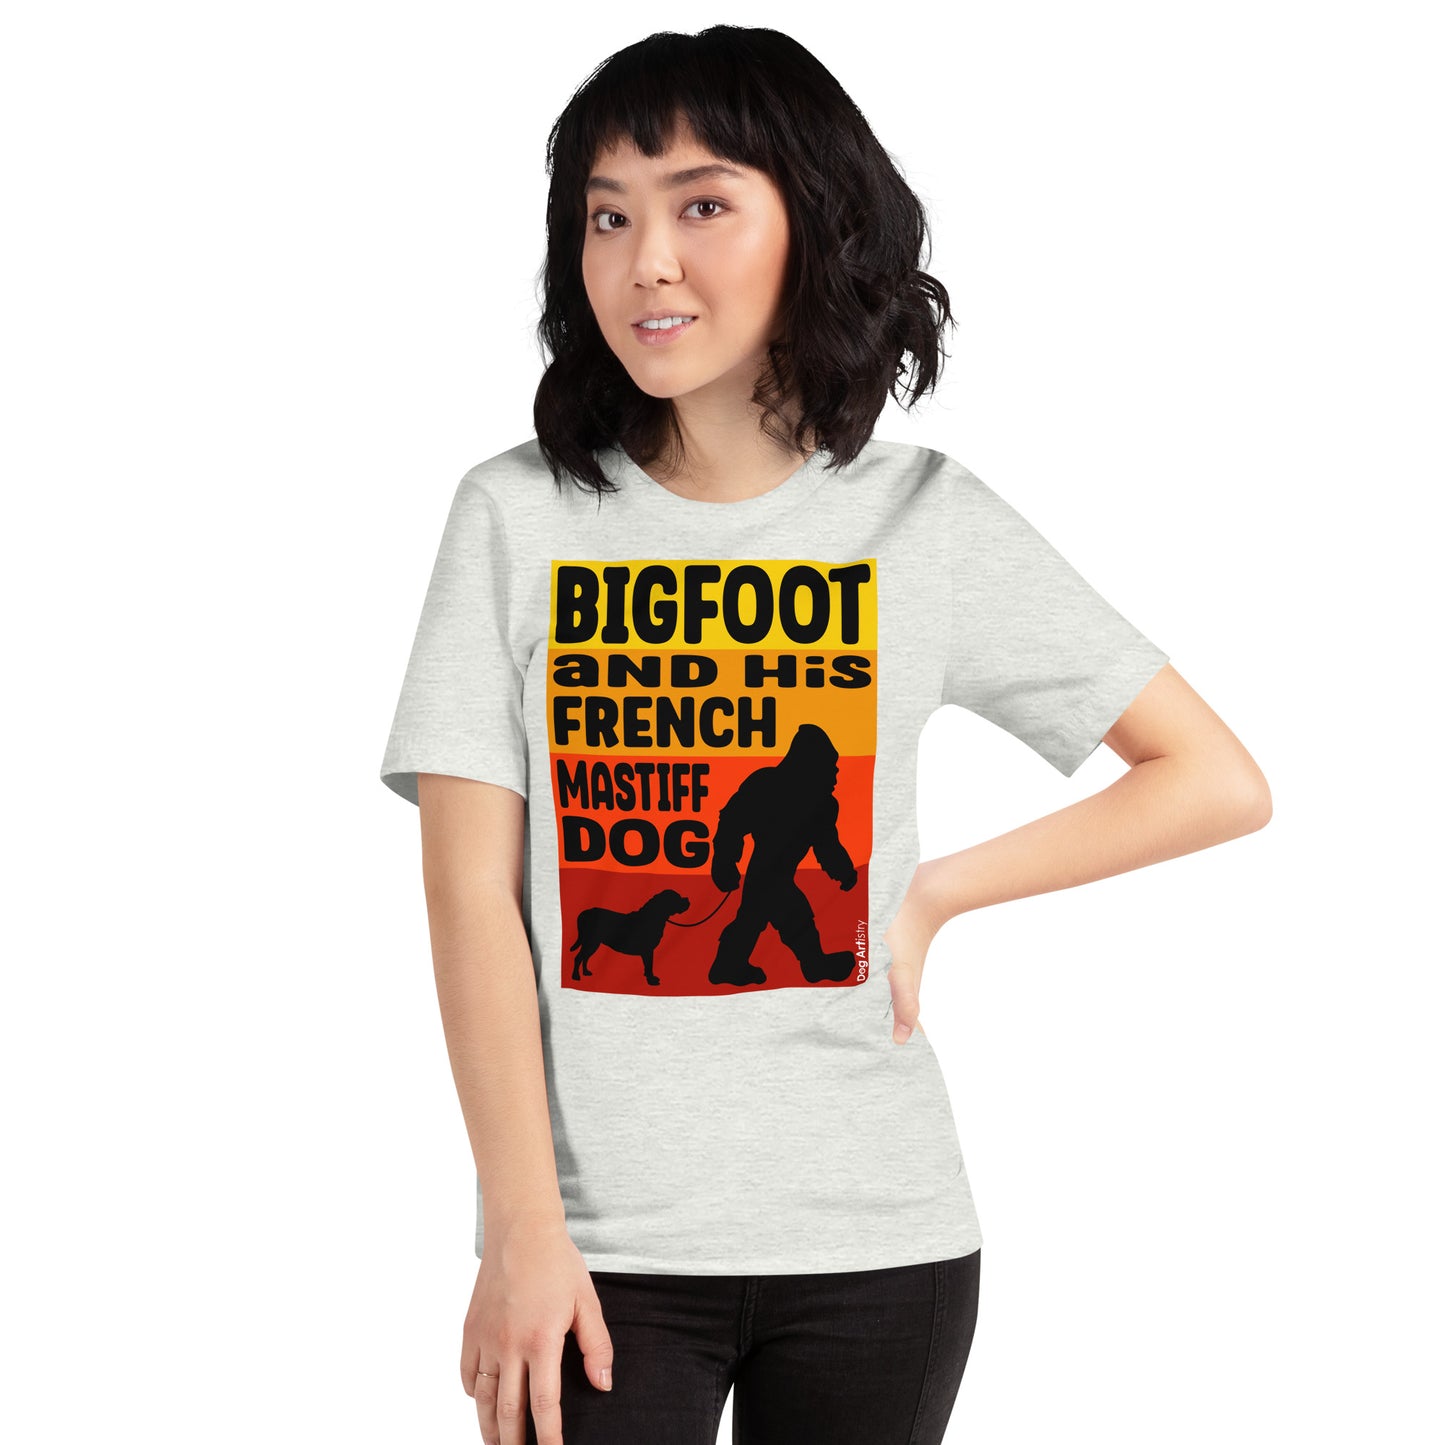 Bigfoot and his French Mastiff unisex ash t-shirt by Dog Artistry.